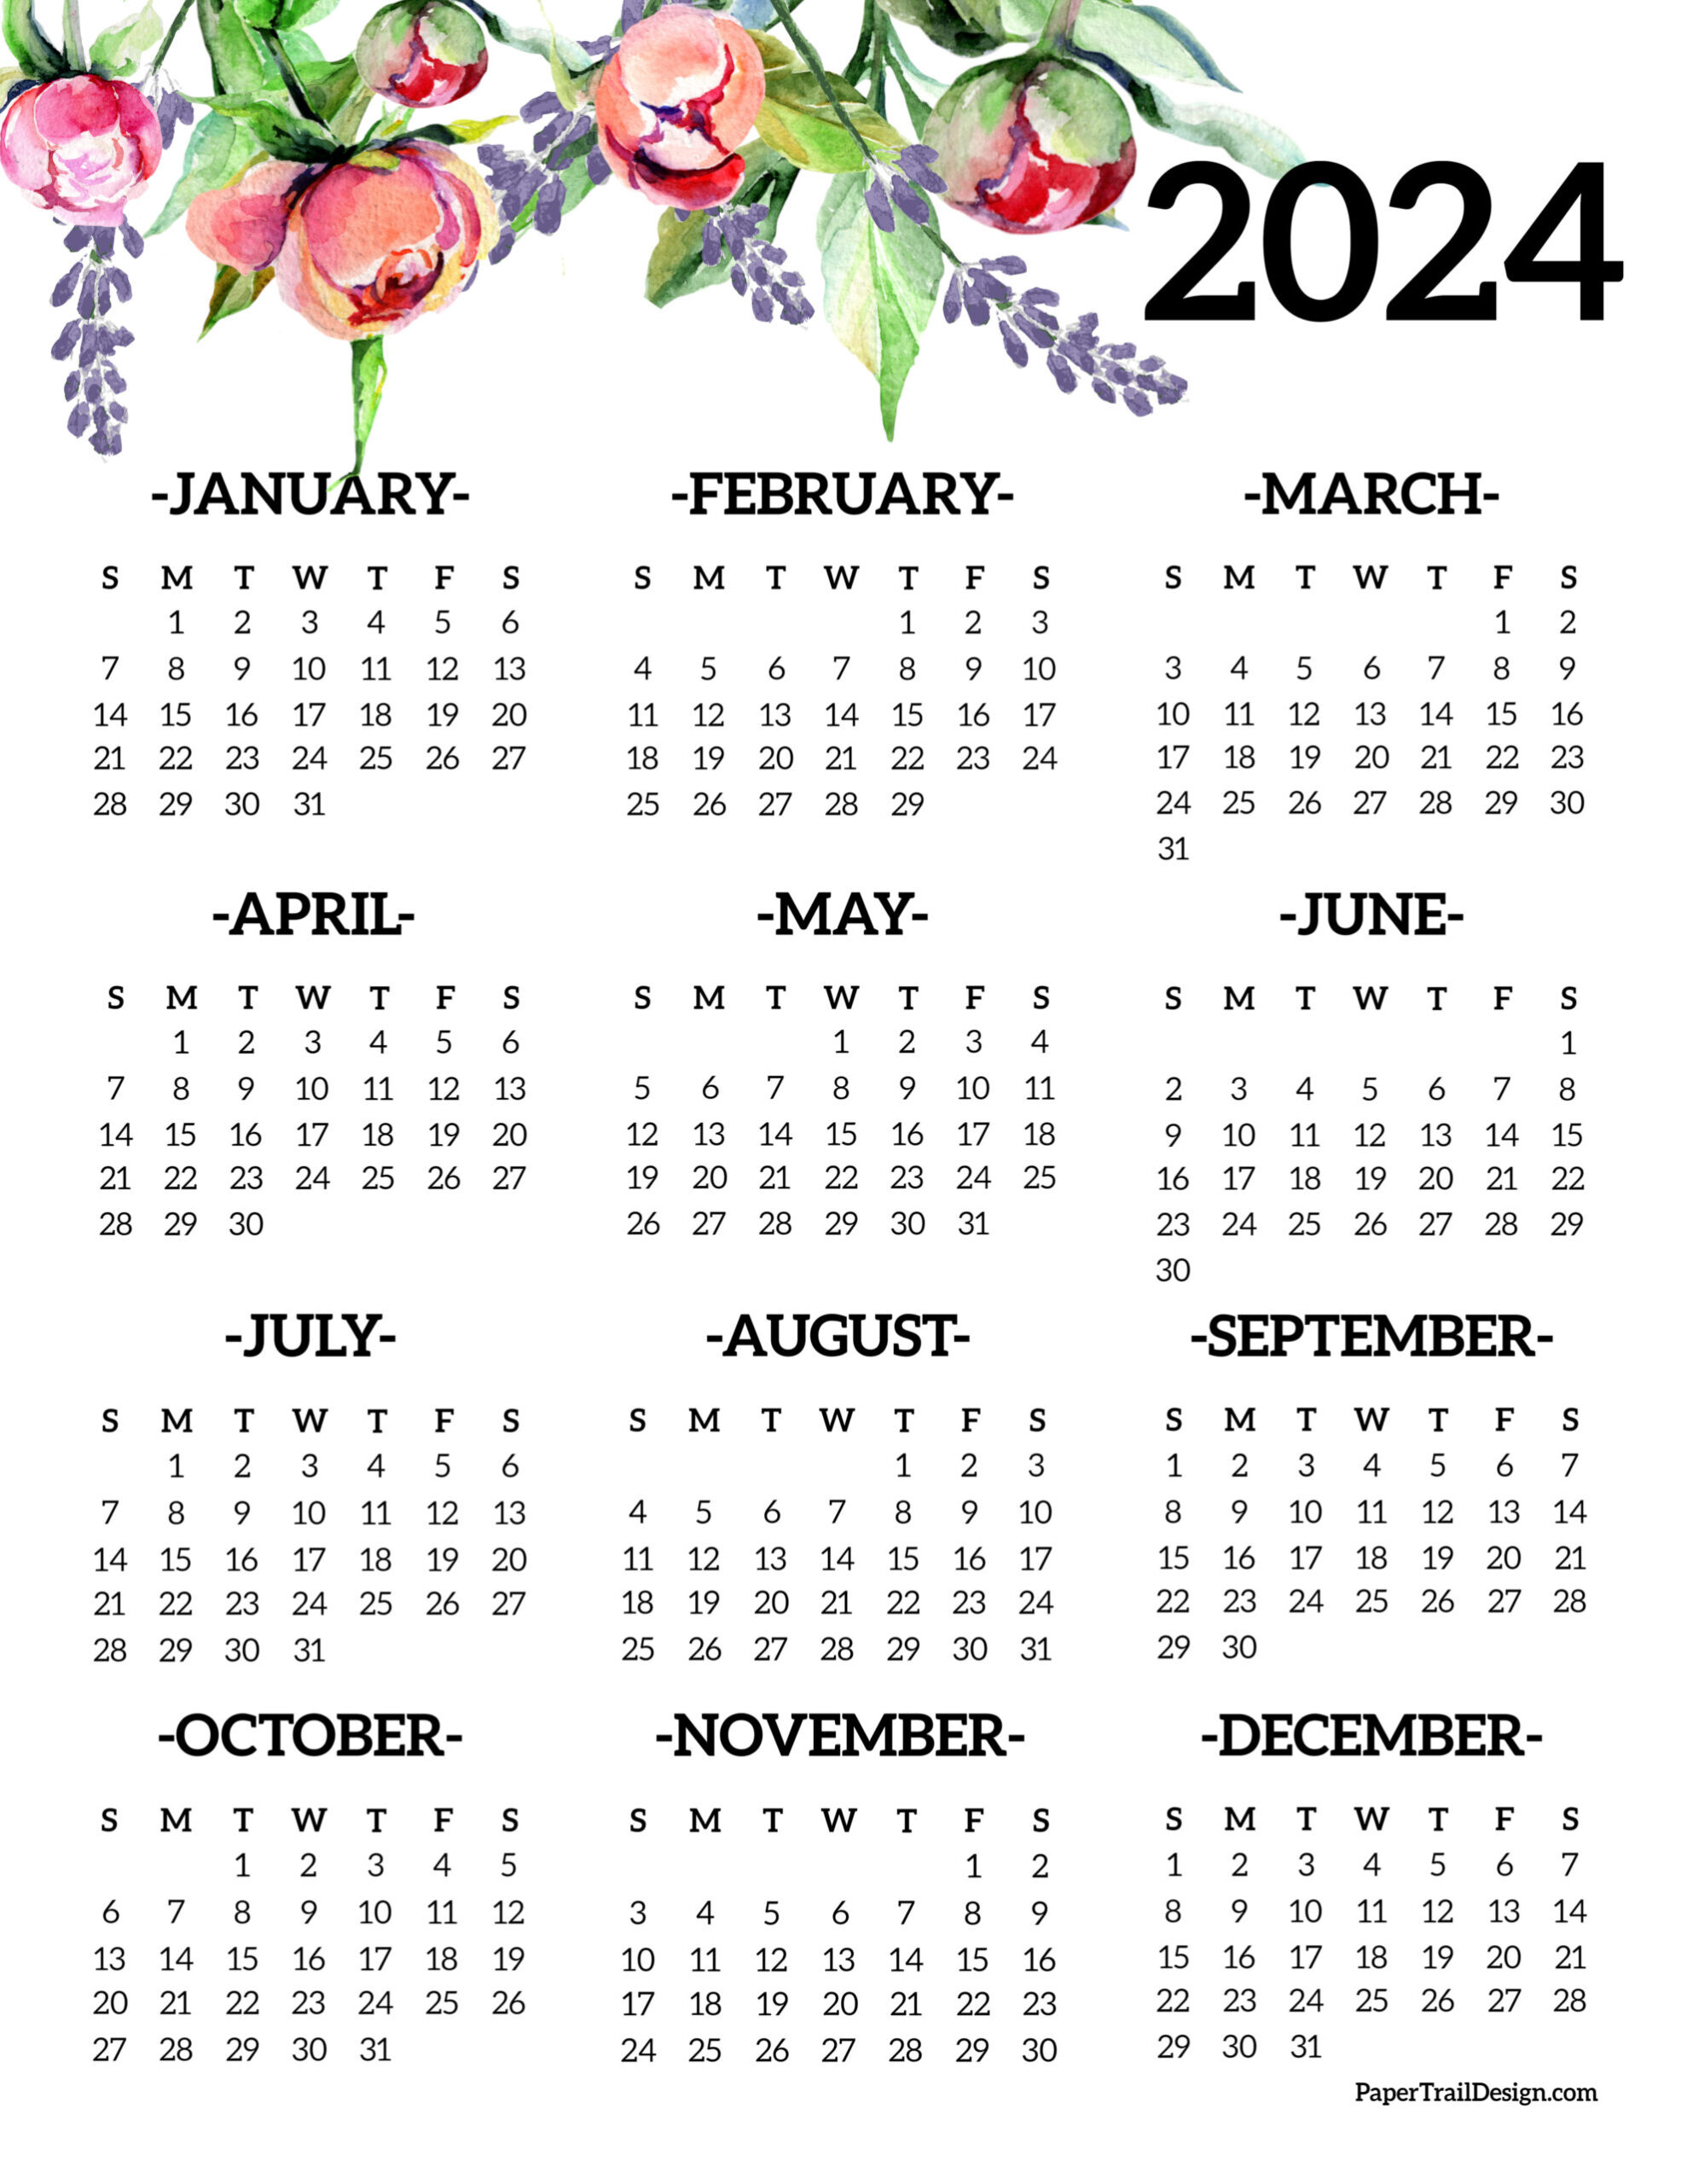 Calendar 2024 Printable One Page - Paper Trail Design for 2024 Calendar On One Page Printable